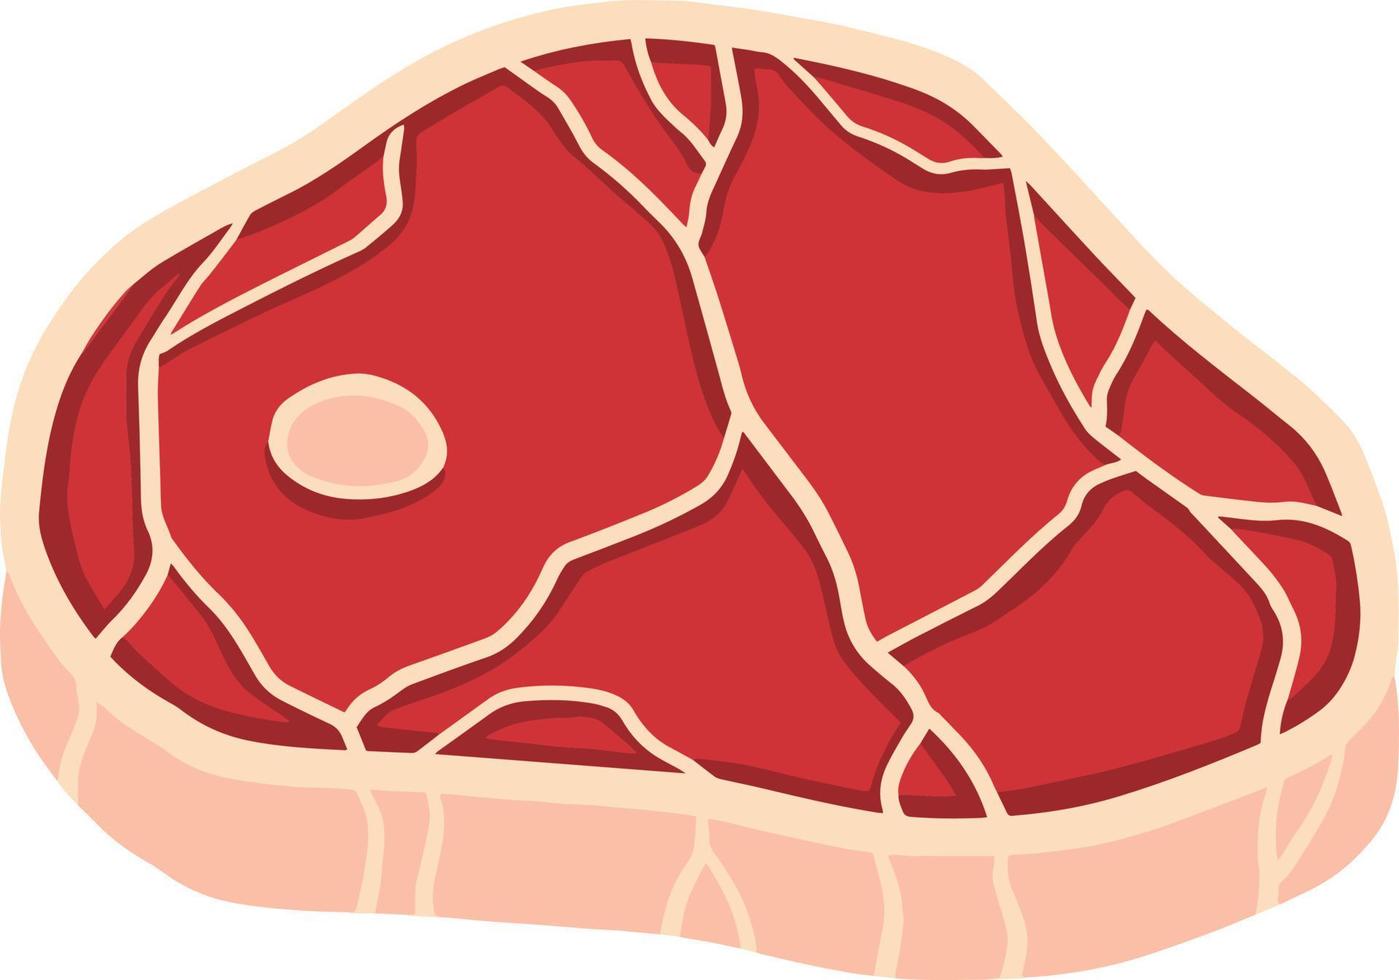 Set of Piece of raw meat. Cartoon illustration. Cut off half beef piece. Fresh red food with streaks and fat. Element of kitchen, grill, BBQ, steak and delicious meal vector